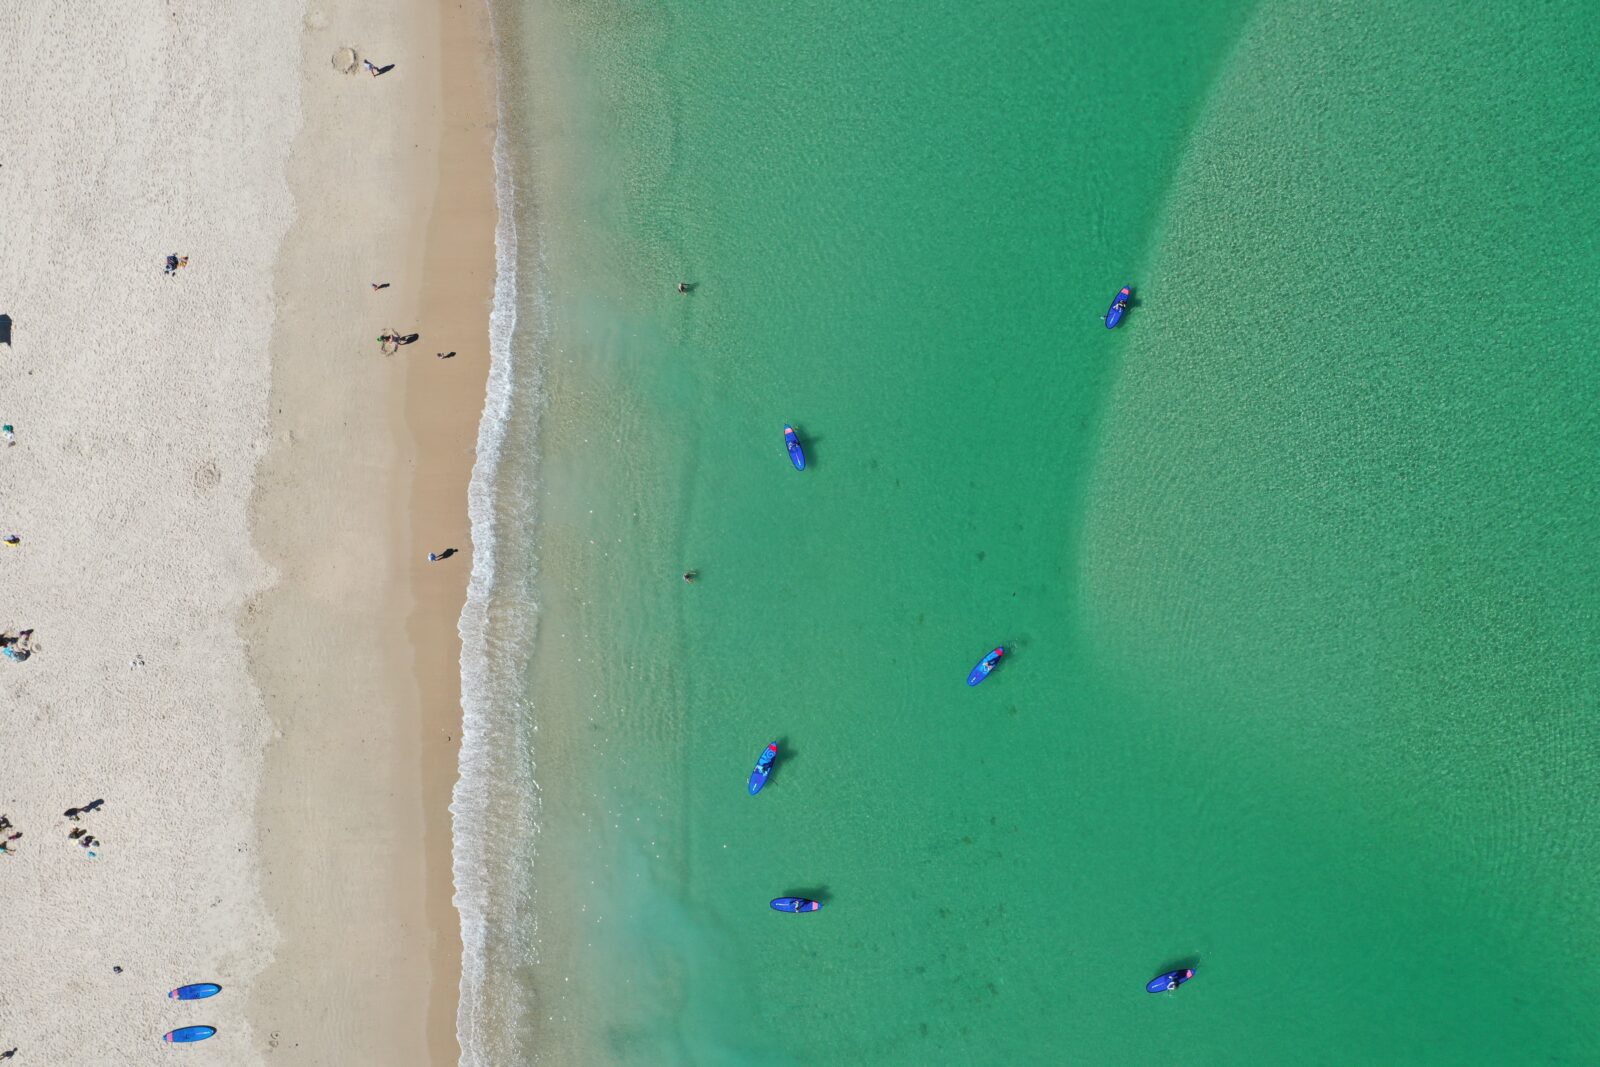 Paddle boarders from above